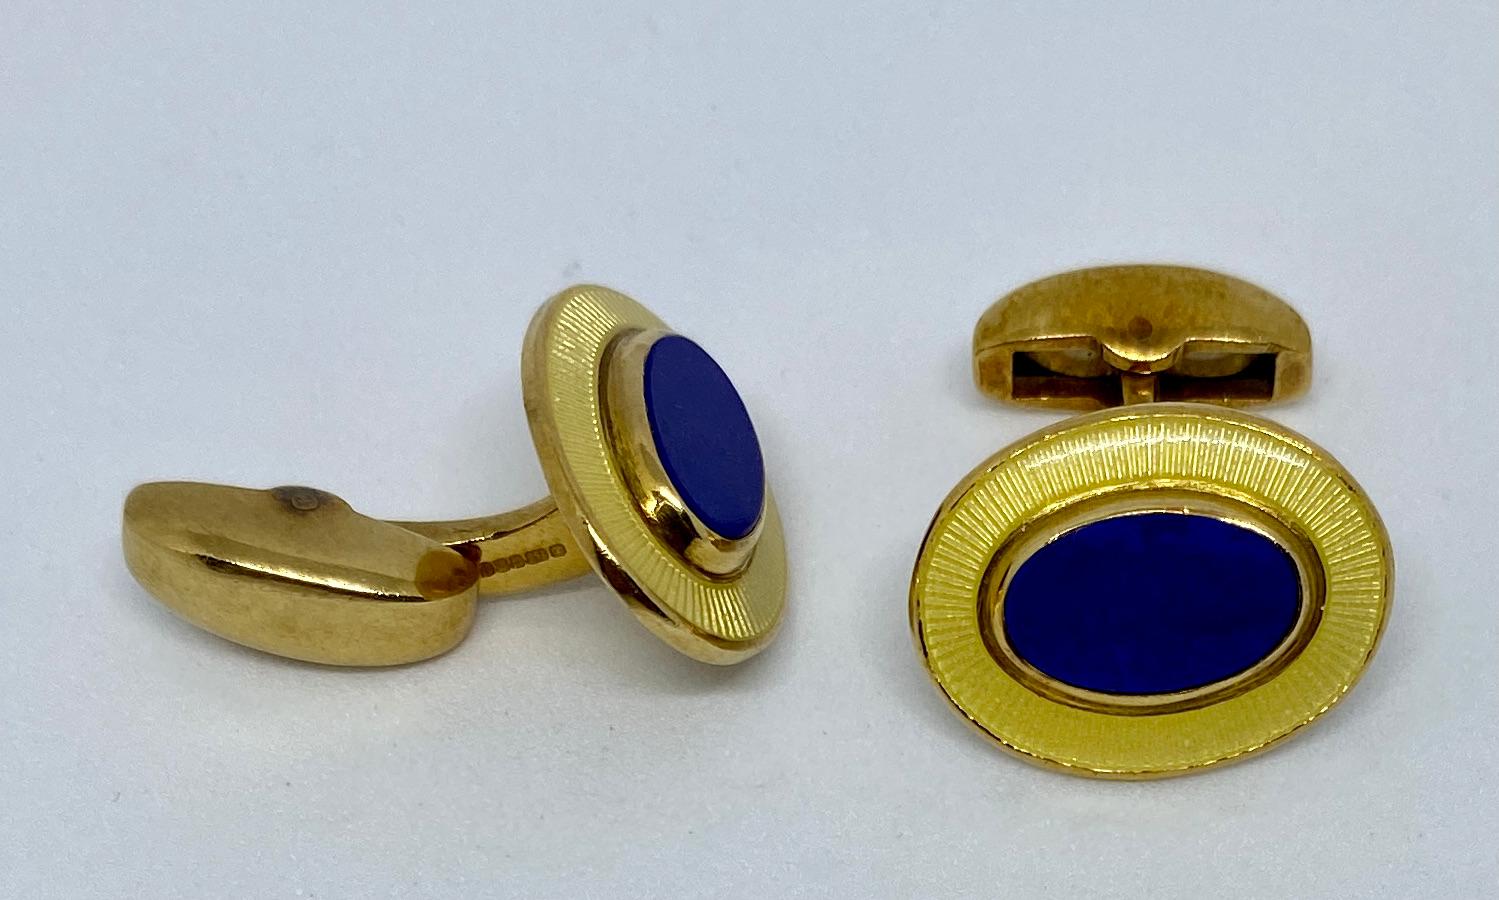 Contemporary Deakin & Francis Cufflinks in 18 Karat Yellow Gold with Inset Lapis and Enamel